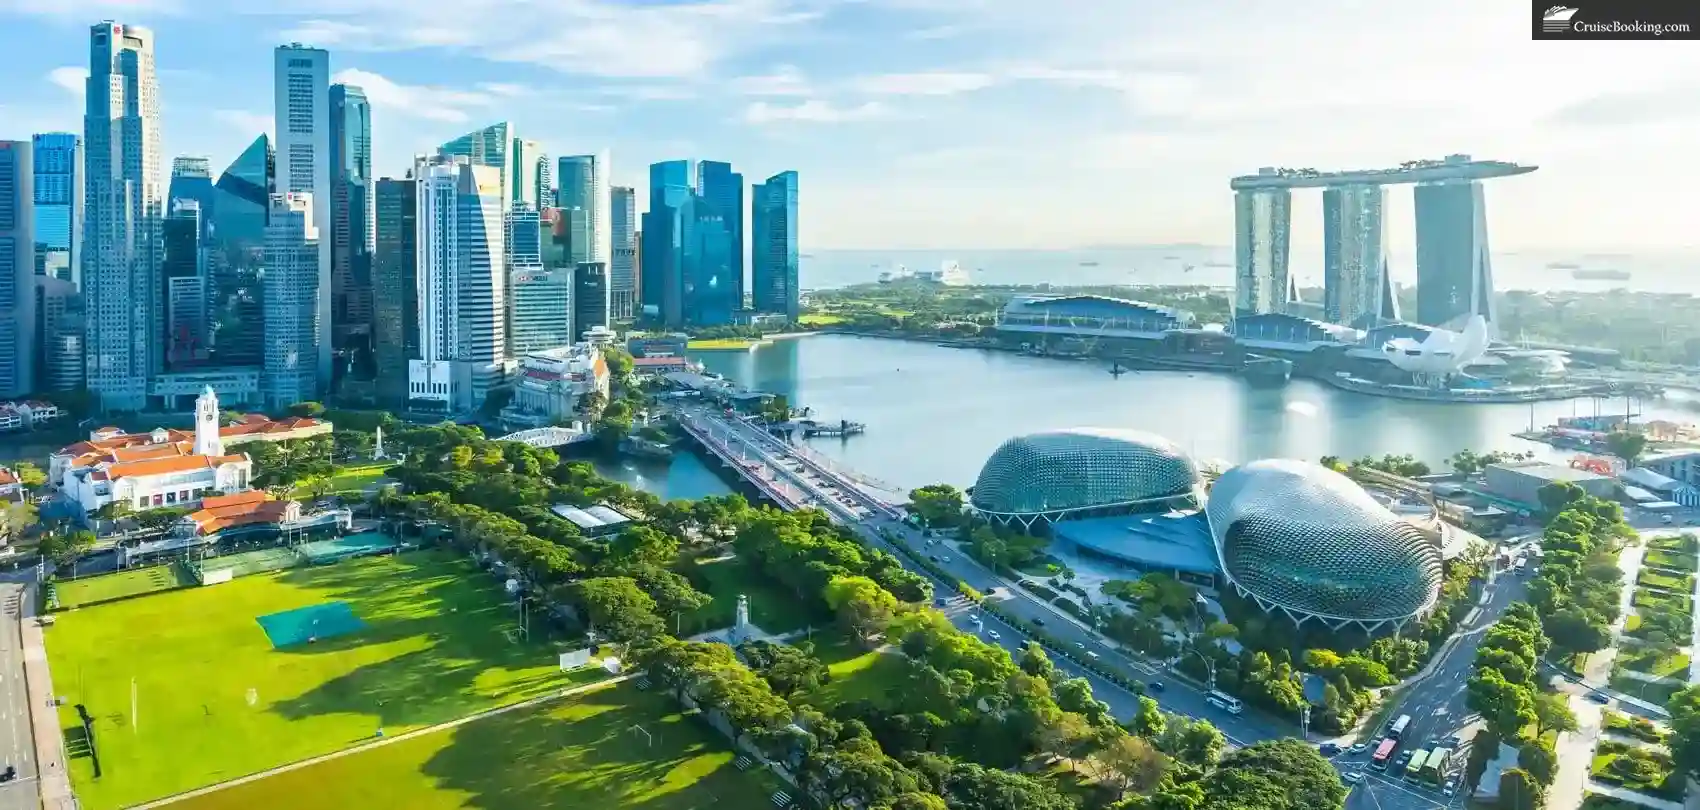 Best Reasons to Choose Singapore for Your Vacation – CruiseBooking.com